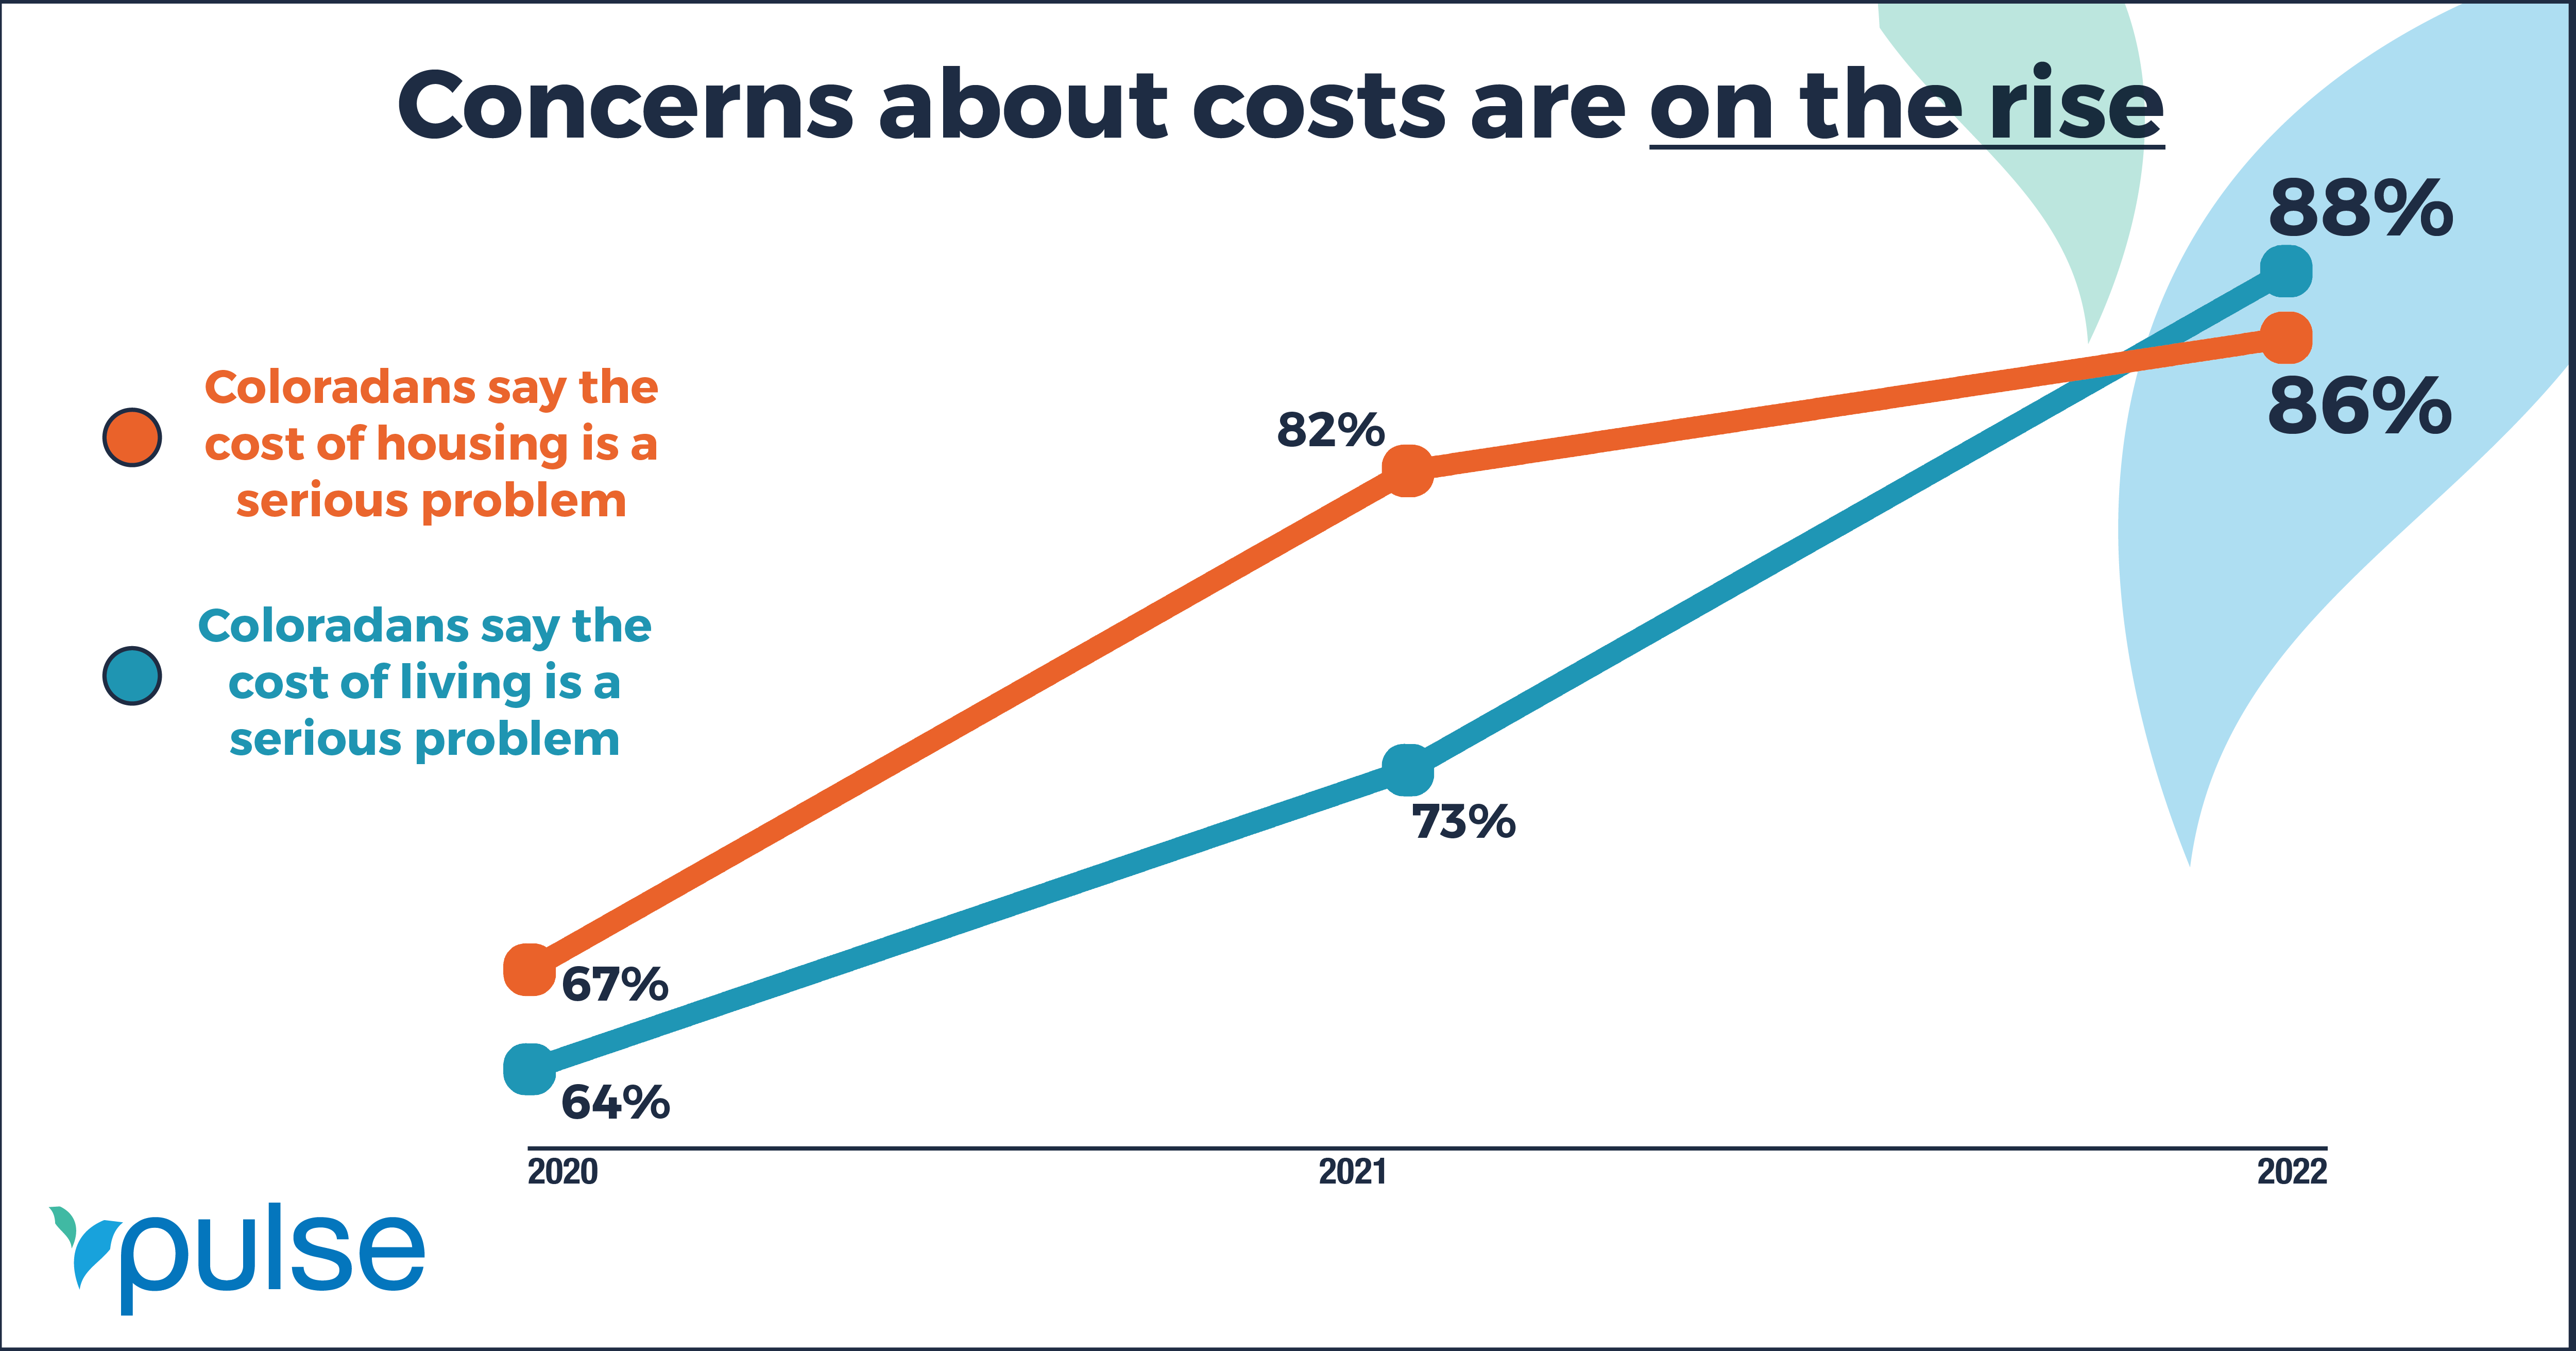 GRAPH: Concerns about costs are on the rise. Coloradans who say the cost of housing is a serious problem - 2020: 67% 2021: 82% 2022: 56%; Coloradans who say the cost of living is a serious problem - 2020: 64% 2021: 73% 2022: 86%